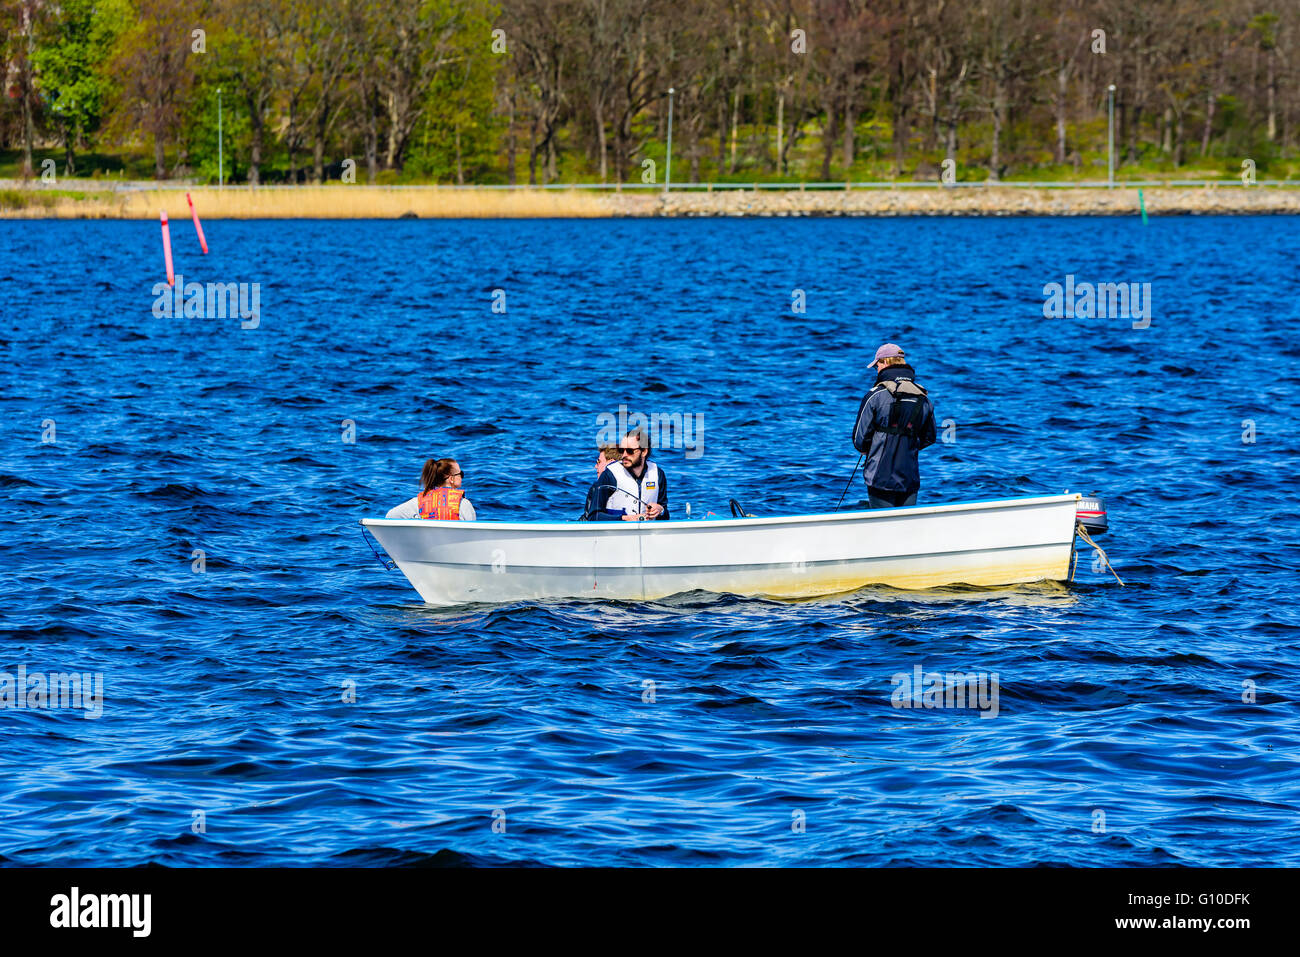 Karlskrona, Sweden - May 03, 2016: Four persons in a small open motorboat fishing at sea with coastline in background. Boat is m Stock Photo